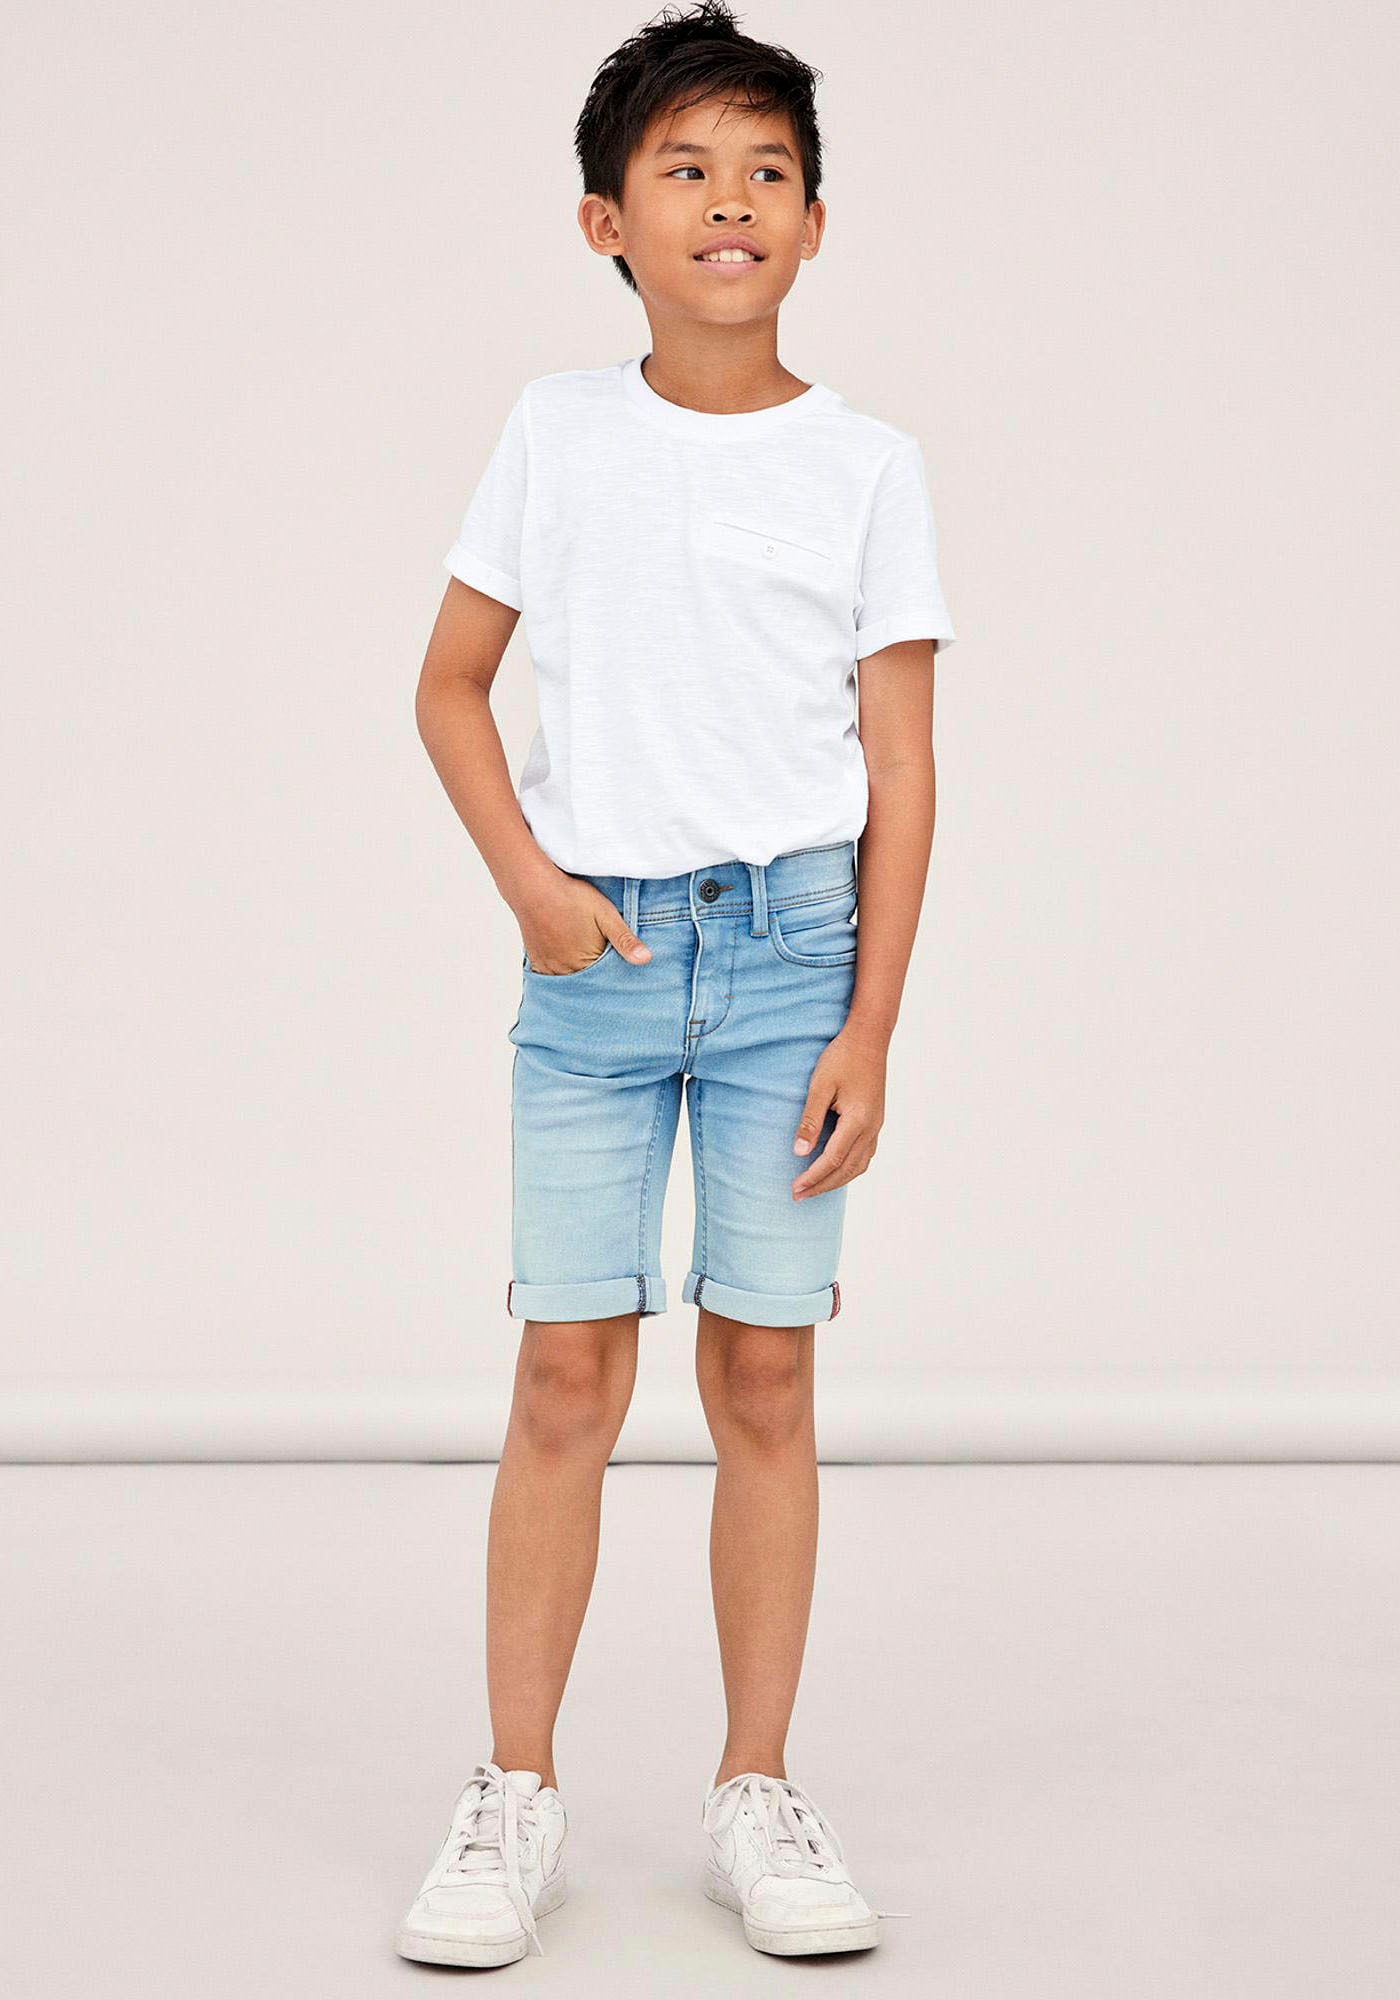 SHORTS OTTO Shorts Name DNM L NOOS« bei »NKMSILAS 2272-TX SLIM It online